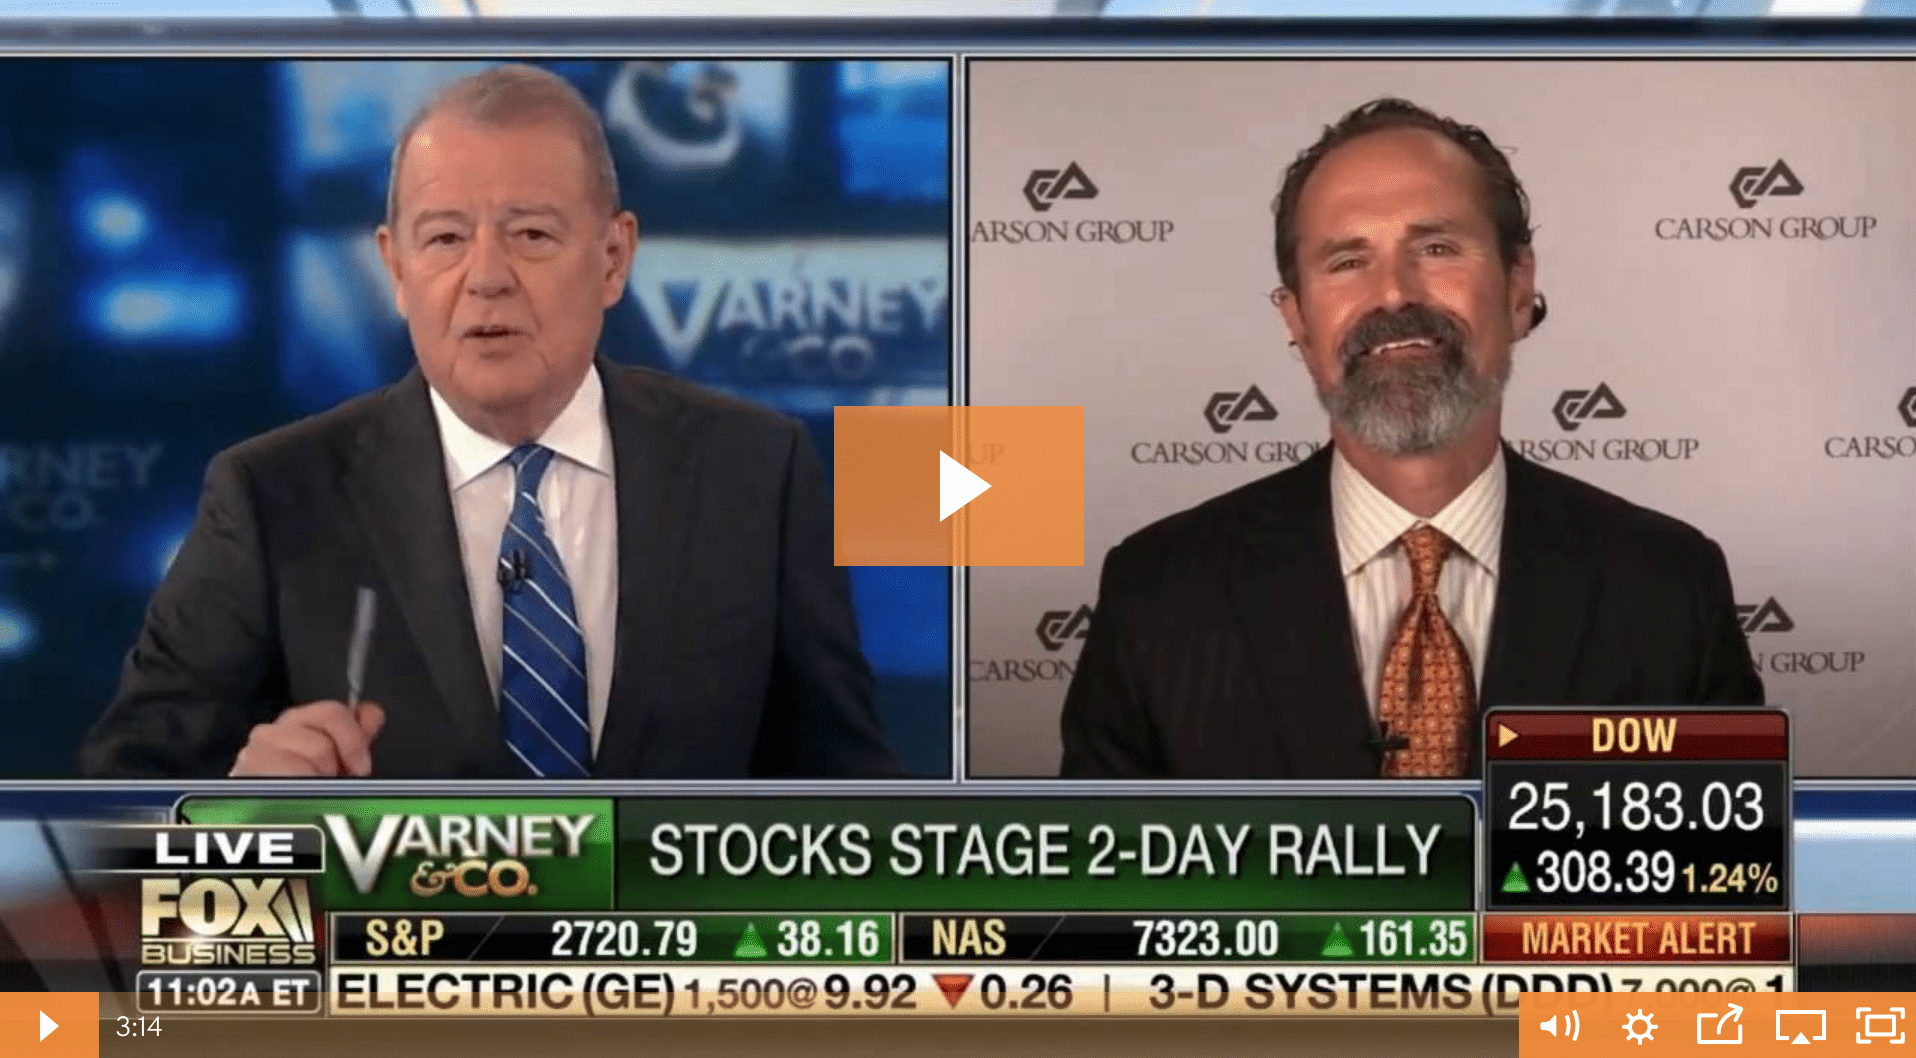 Ron Carson discusses the Election and Markets on Fox Business